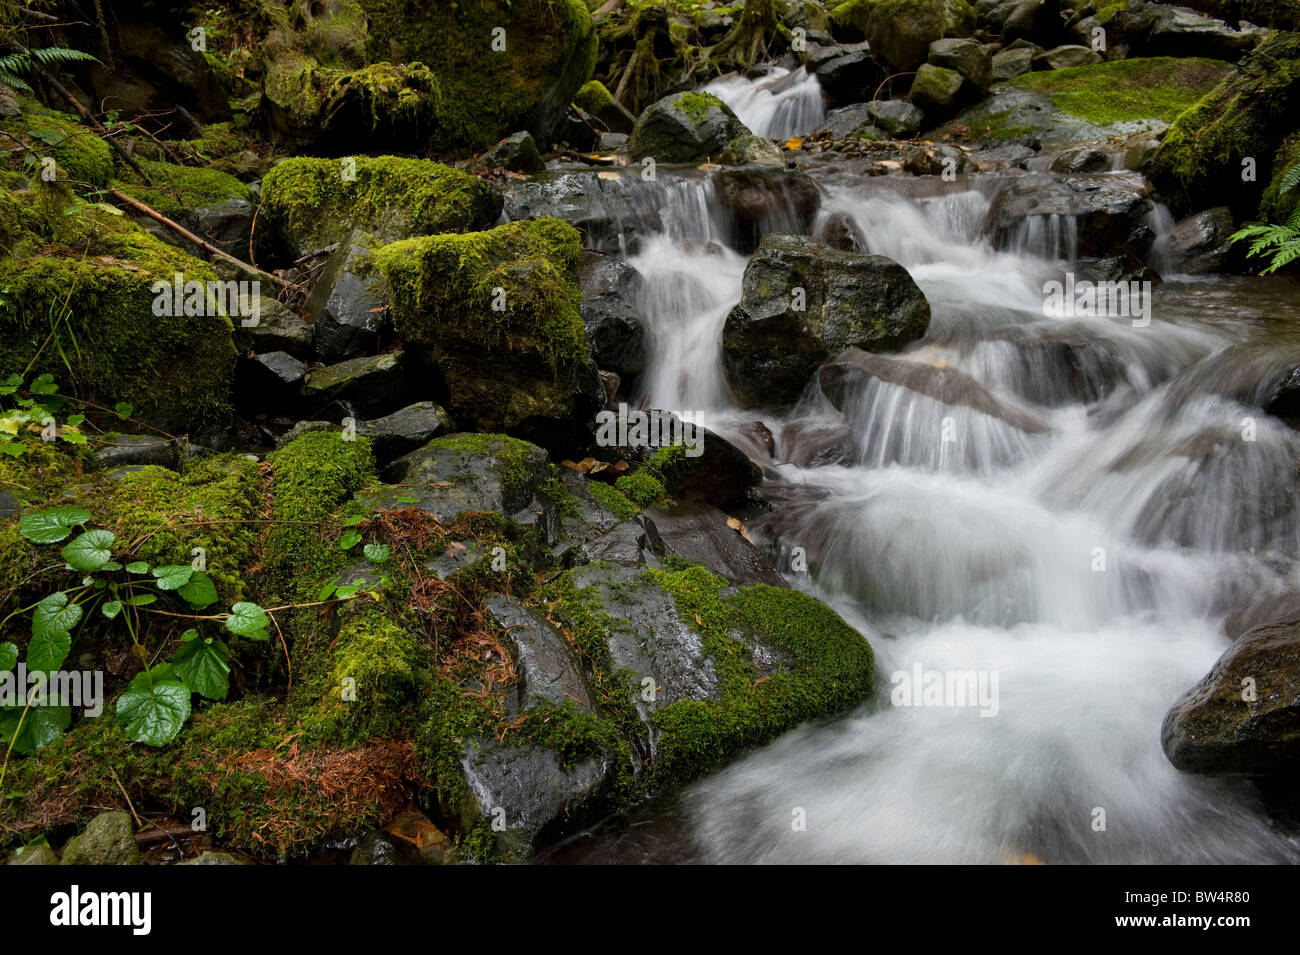 This beautiful small creek near Nooksack Falls, Washington,  is an excellent example of a rain forest environment. Stock Photo